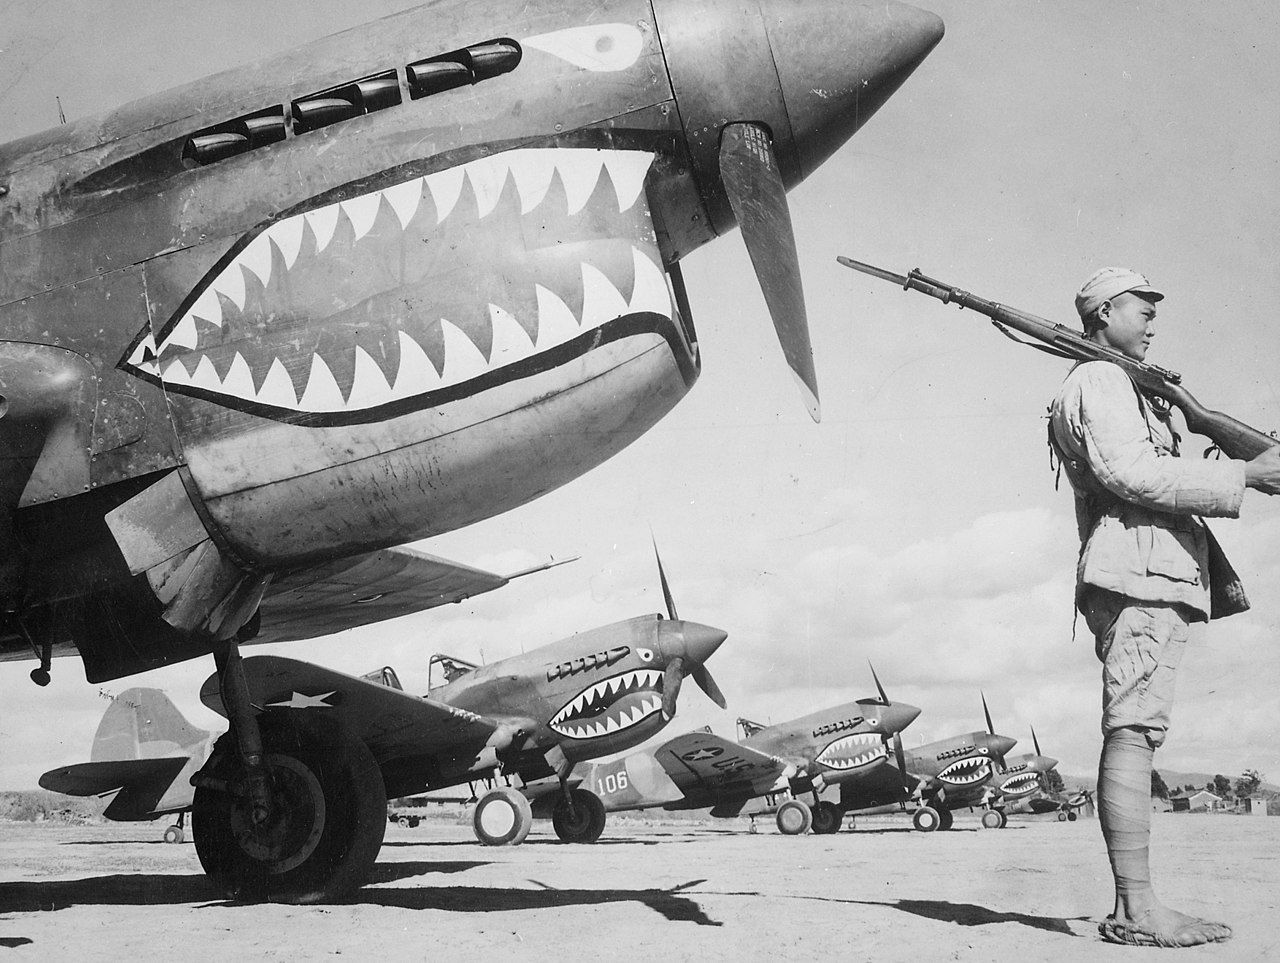 P-40s with the famous shark mouth nose art